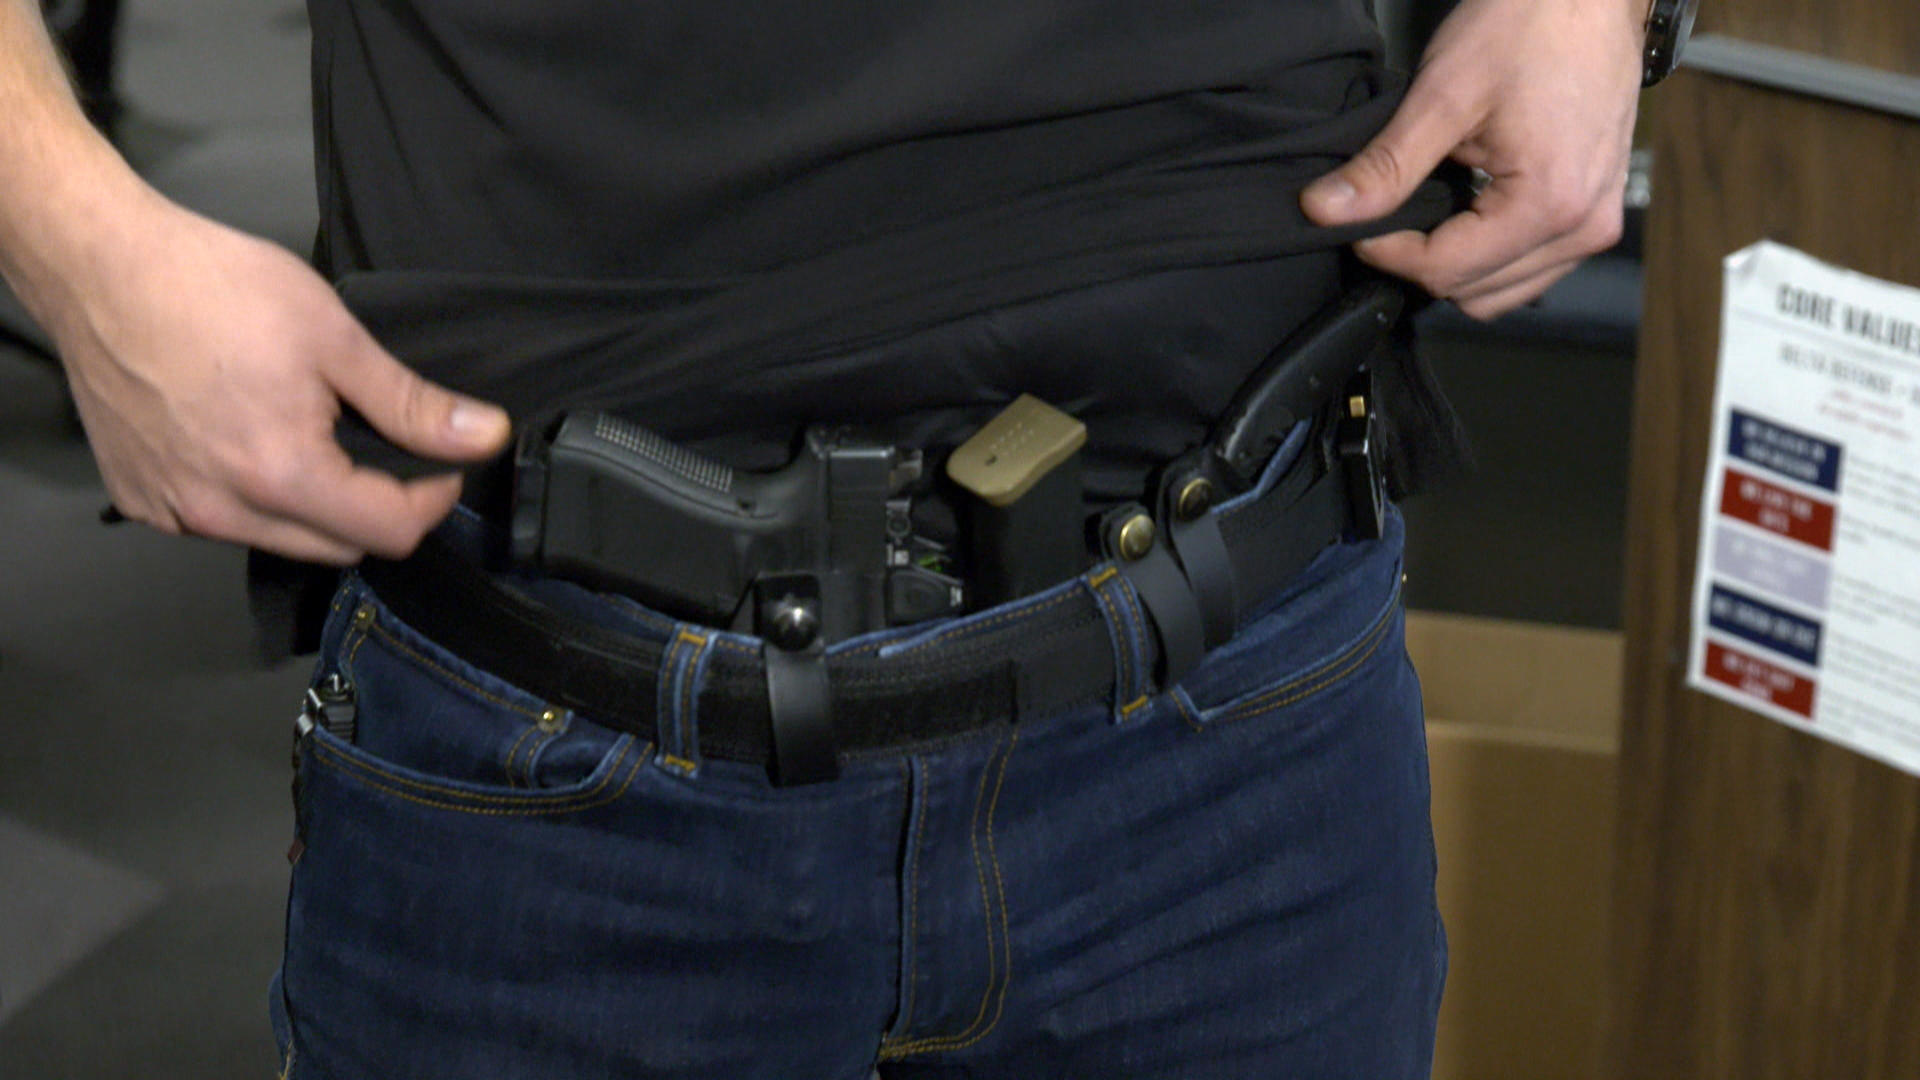 California Democrats approve new concealed-carry rules - Los